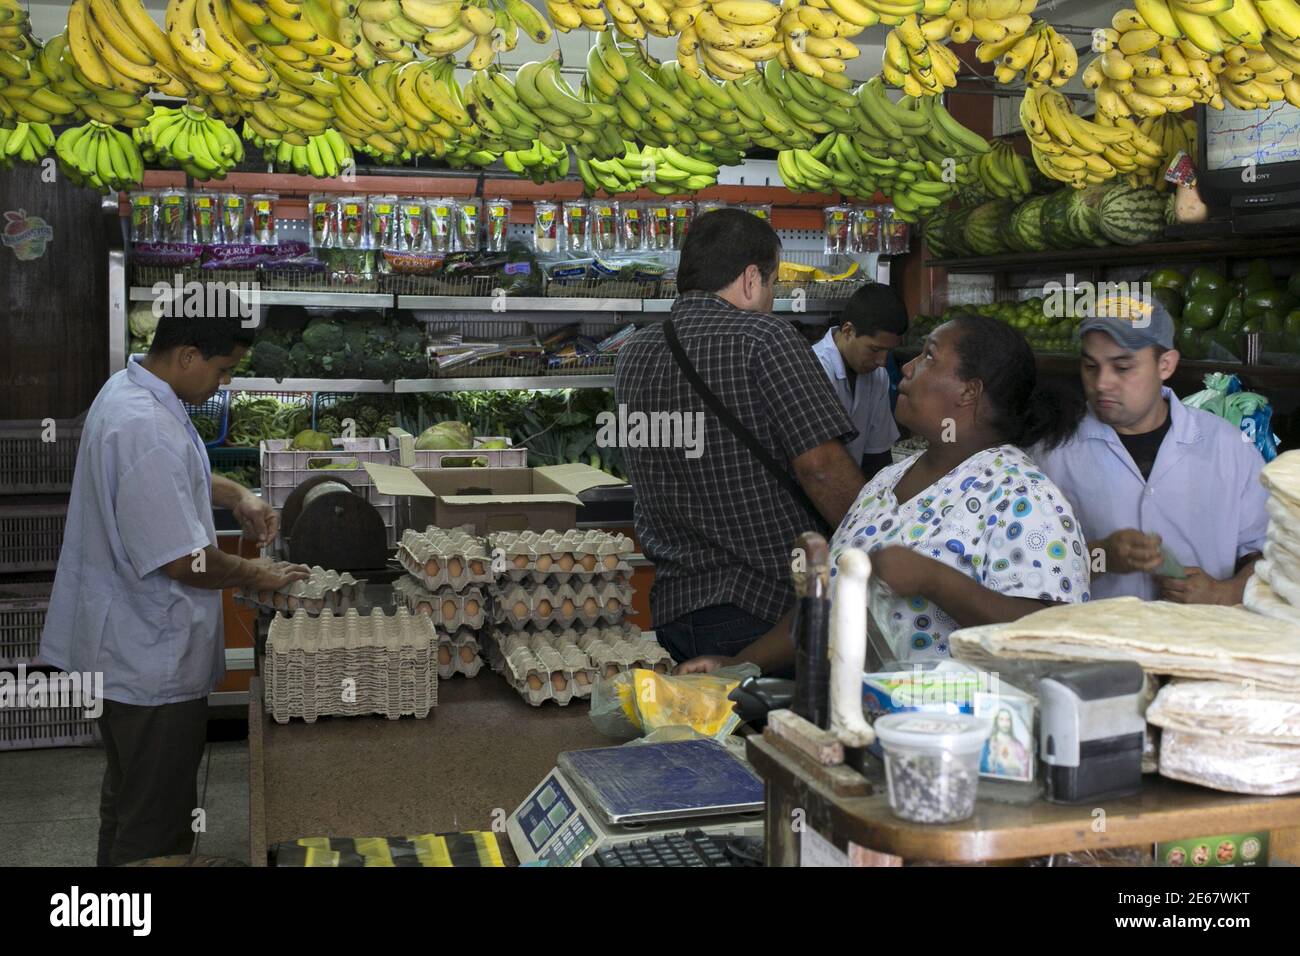 A customer selects bananas as others buy goods at a fruit and vegetable store in Caracas, July 10, 2015. A debilitating recession and a drop in oil prices have harmed the OPEC nation's ability to provide dollars through its complex three-tiered currency control system, pushing up the black market rate at a dizzying speed. The bolivar sank past 600 per U.S. dollar on Thursday, compared with 73 a year ago, according to anti-government website DolarToday.REUTERS/Marco Bello Stock Photo